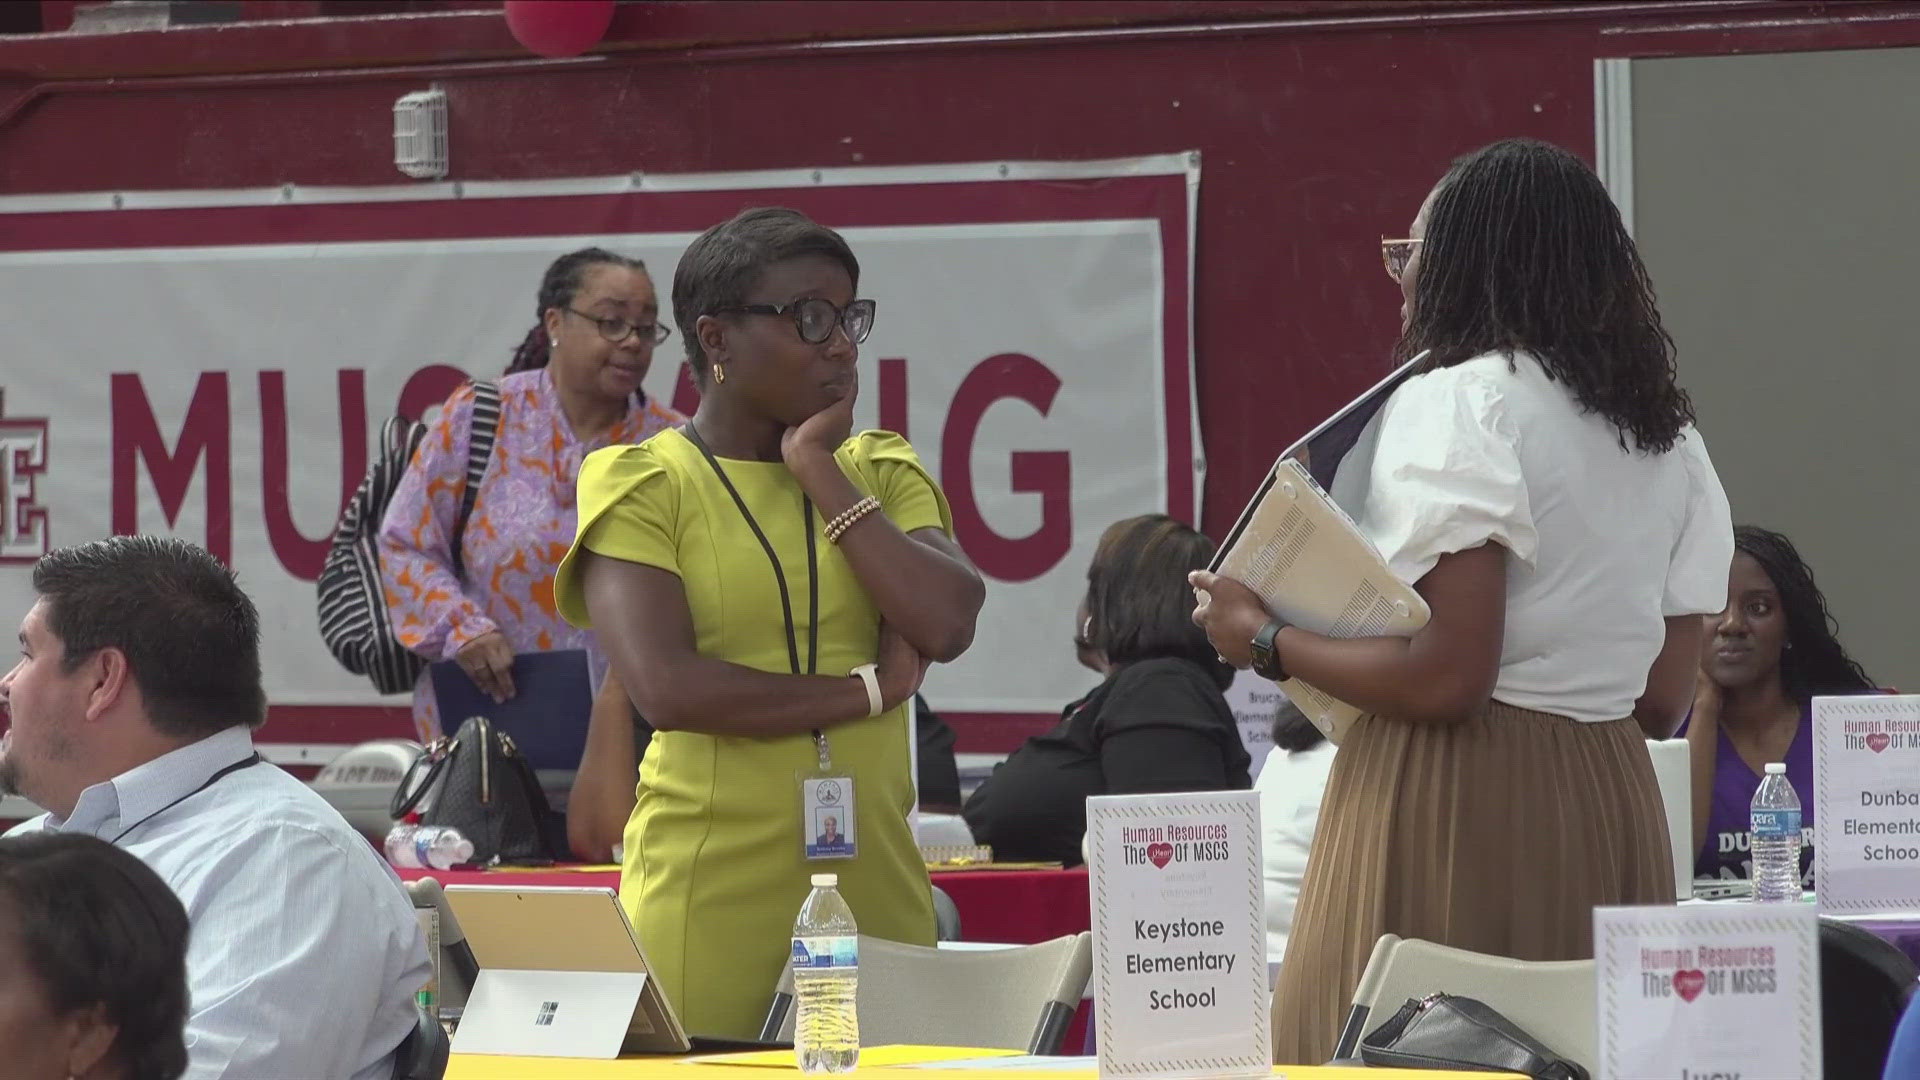 On Tuesday, MSCS hosted a hiring blitz to fill more vacancies before the fall.